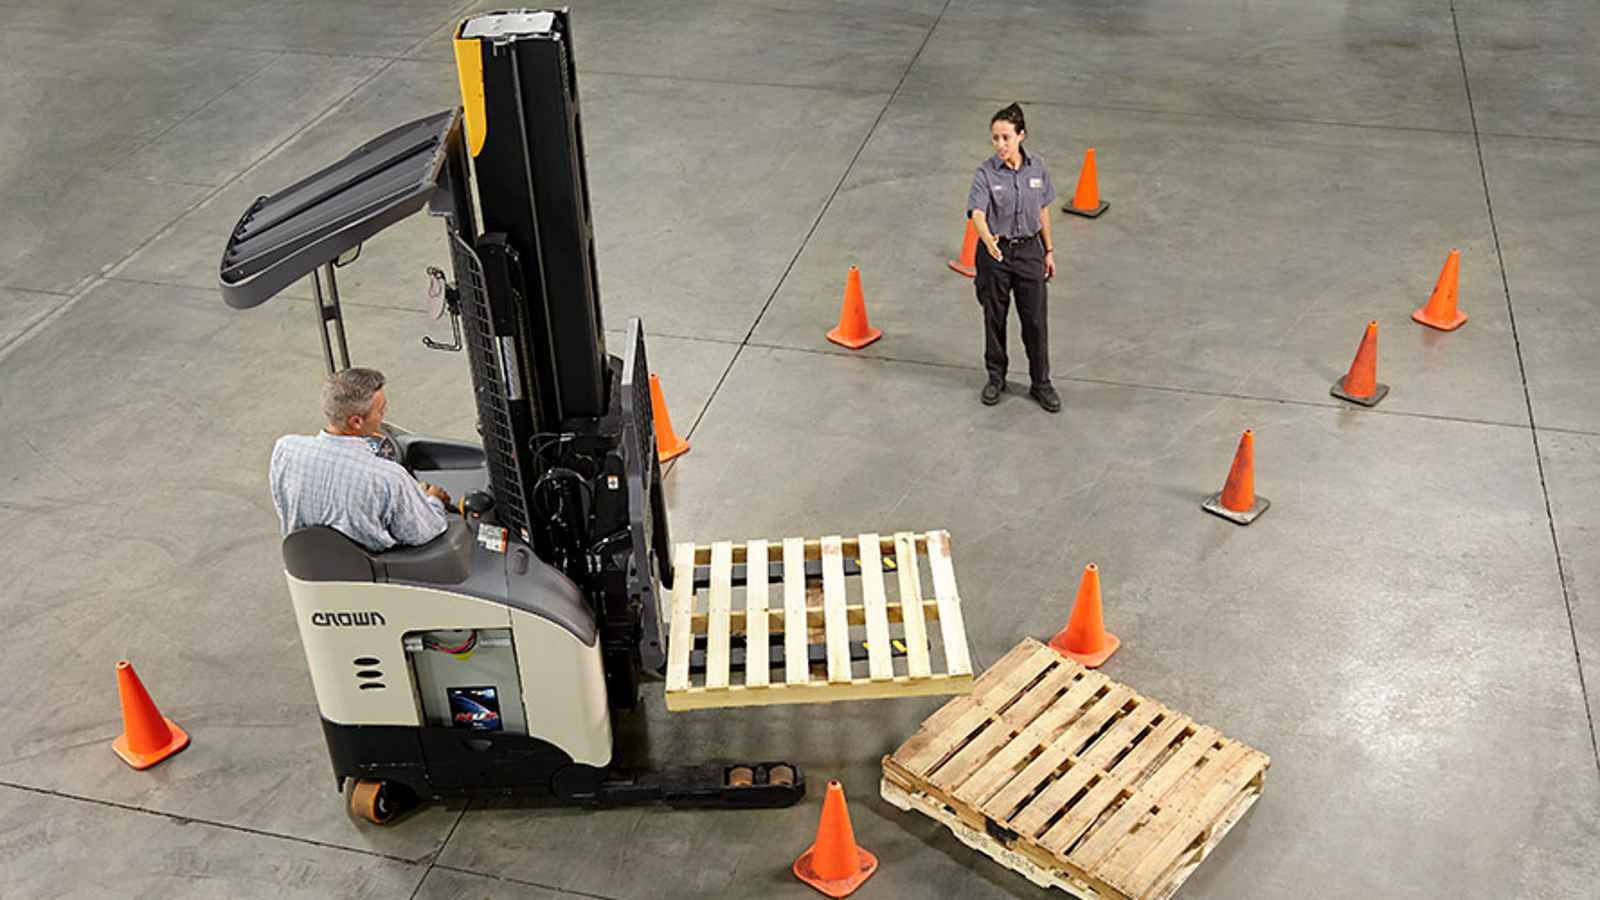 National Forklift Safety Day 2023: Date, History, Facts about Industrial Cranes